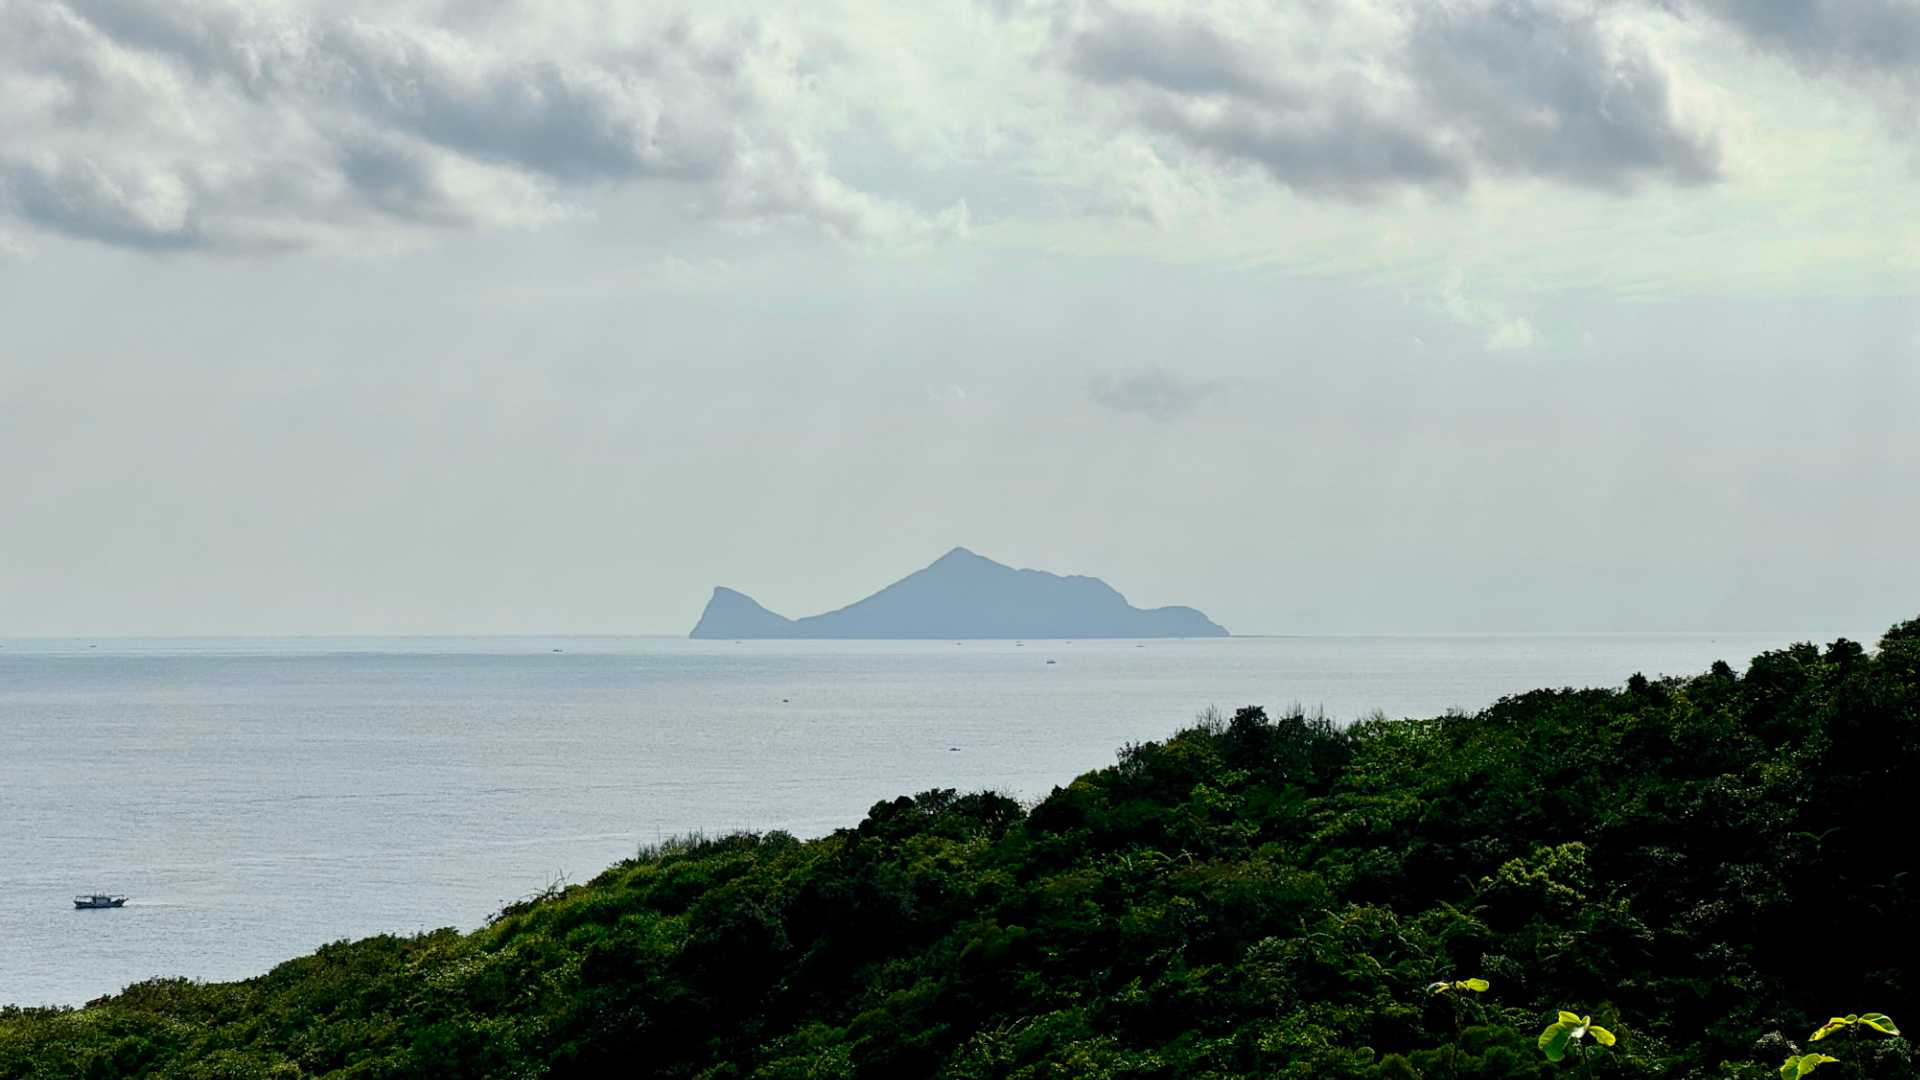 View of Turtle Island, off the coast of Taiwan. The silhouette of the island looks roughly like the shape of a turtle.